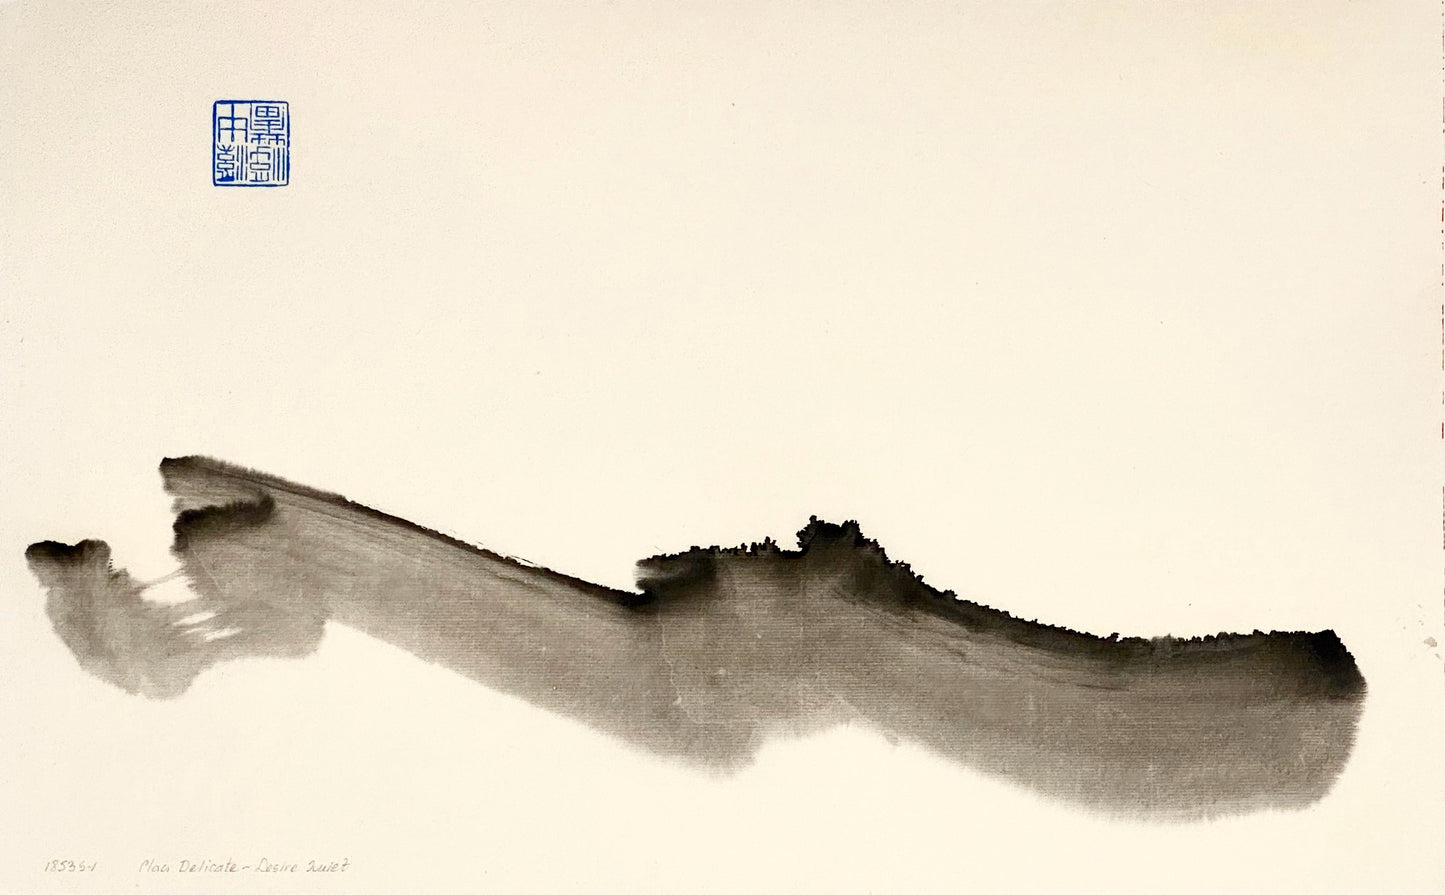 "Play Delicate - Desire Quiet  2” by Marilyn Wells - Abstract sumi e